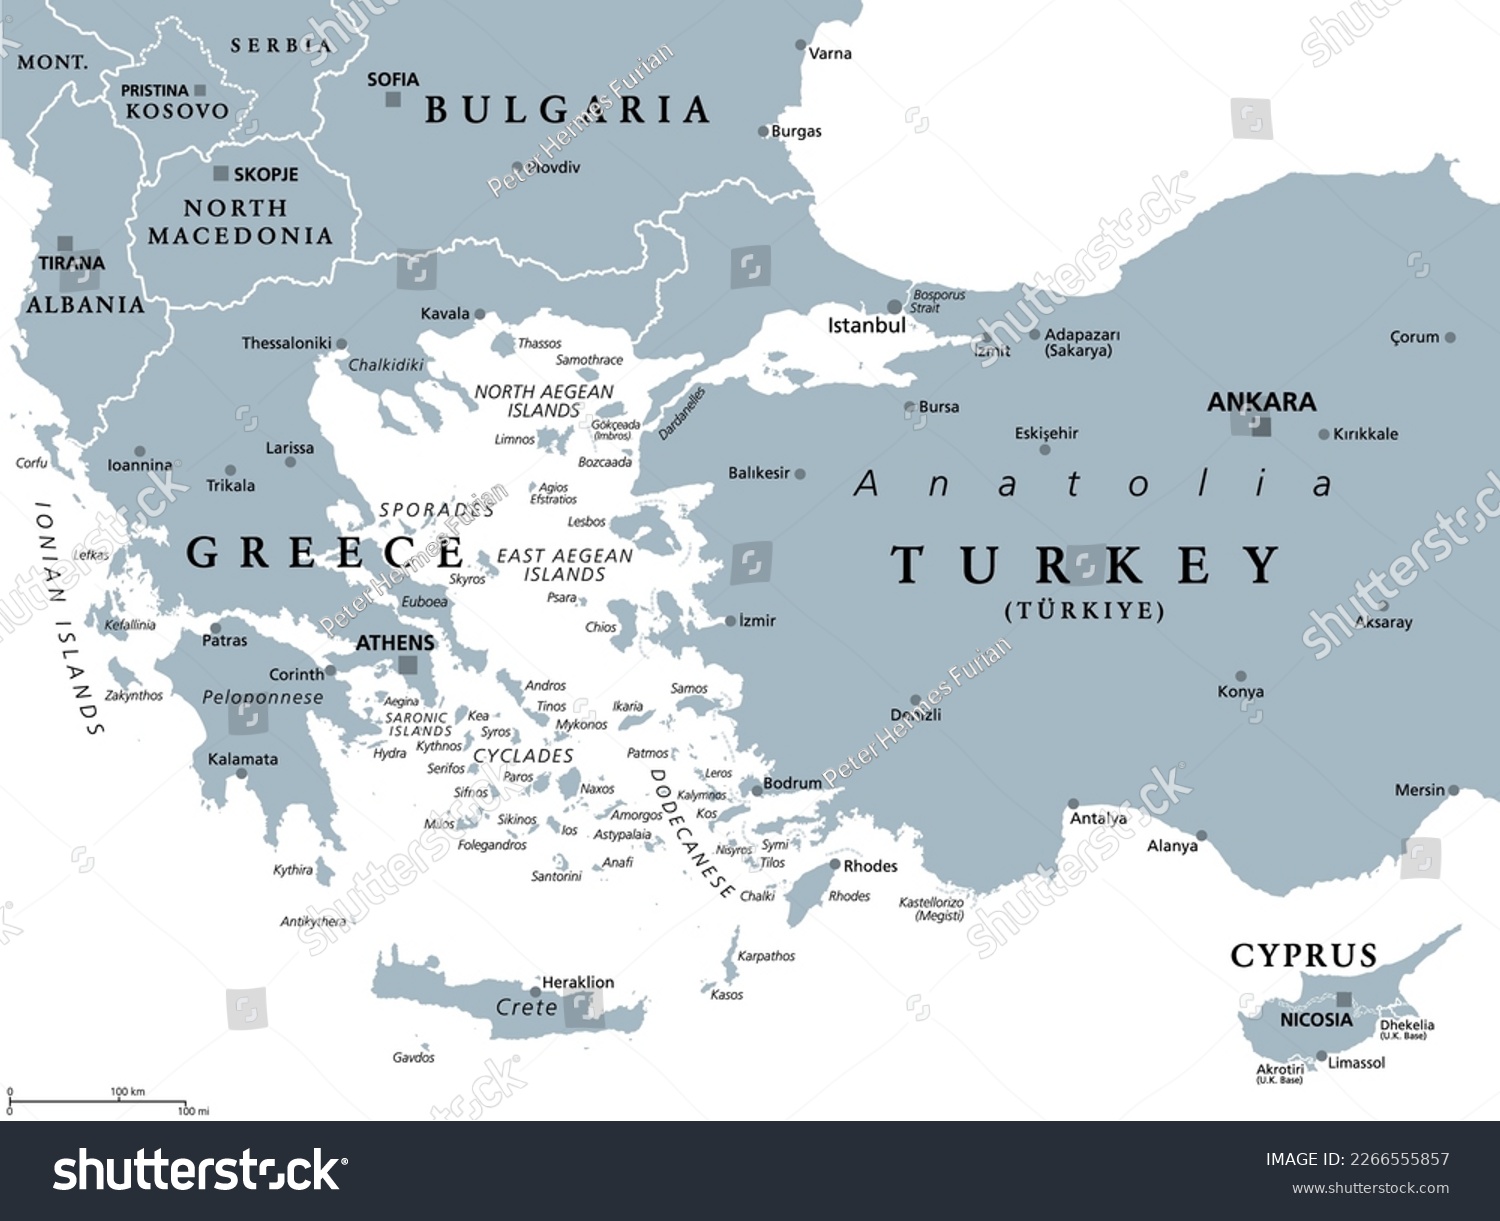 SVG of Aegean Sea region, with Aegean Islands, gray political map. An elongated embayment of the Mediterranean Sea, located between Europe and Asia, between the Balkans and Anatolia, and Greece and Turkey. svg